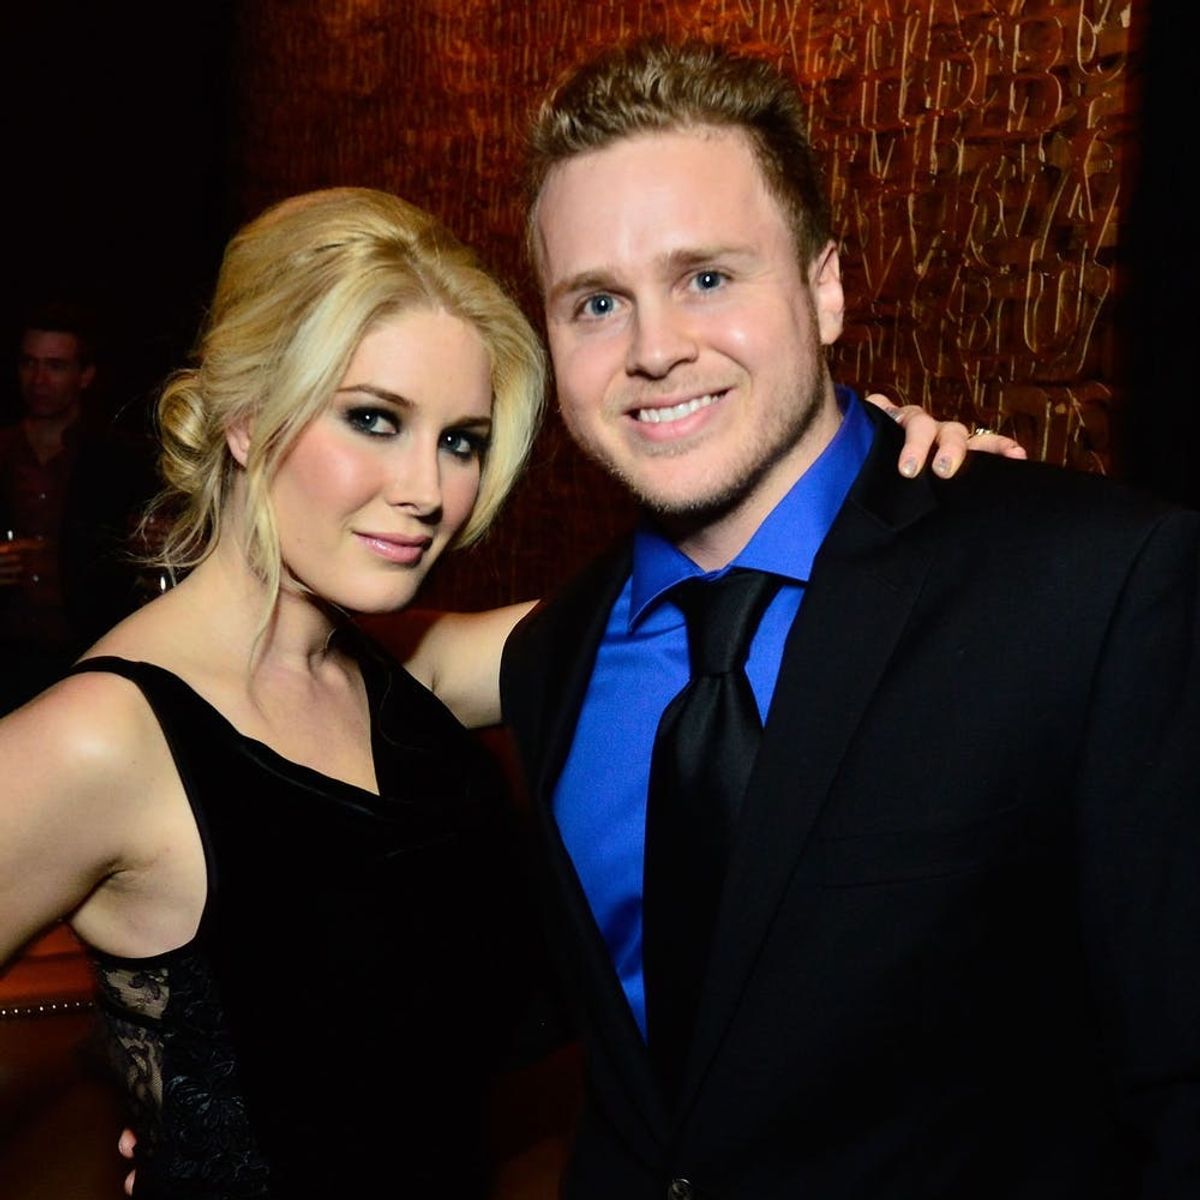 The First Photo of Heidi Montag and Spencer Pratt’s Baby Is Here!